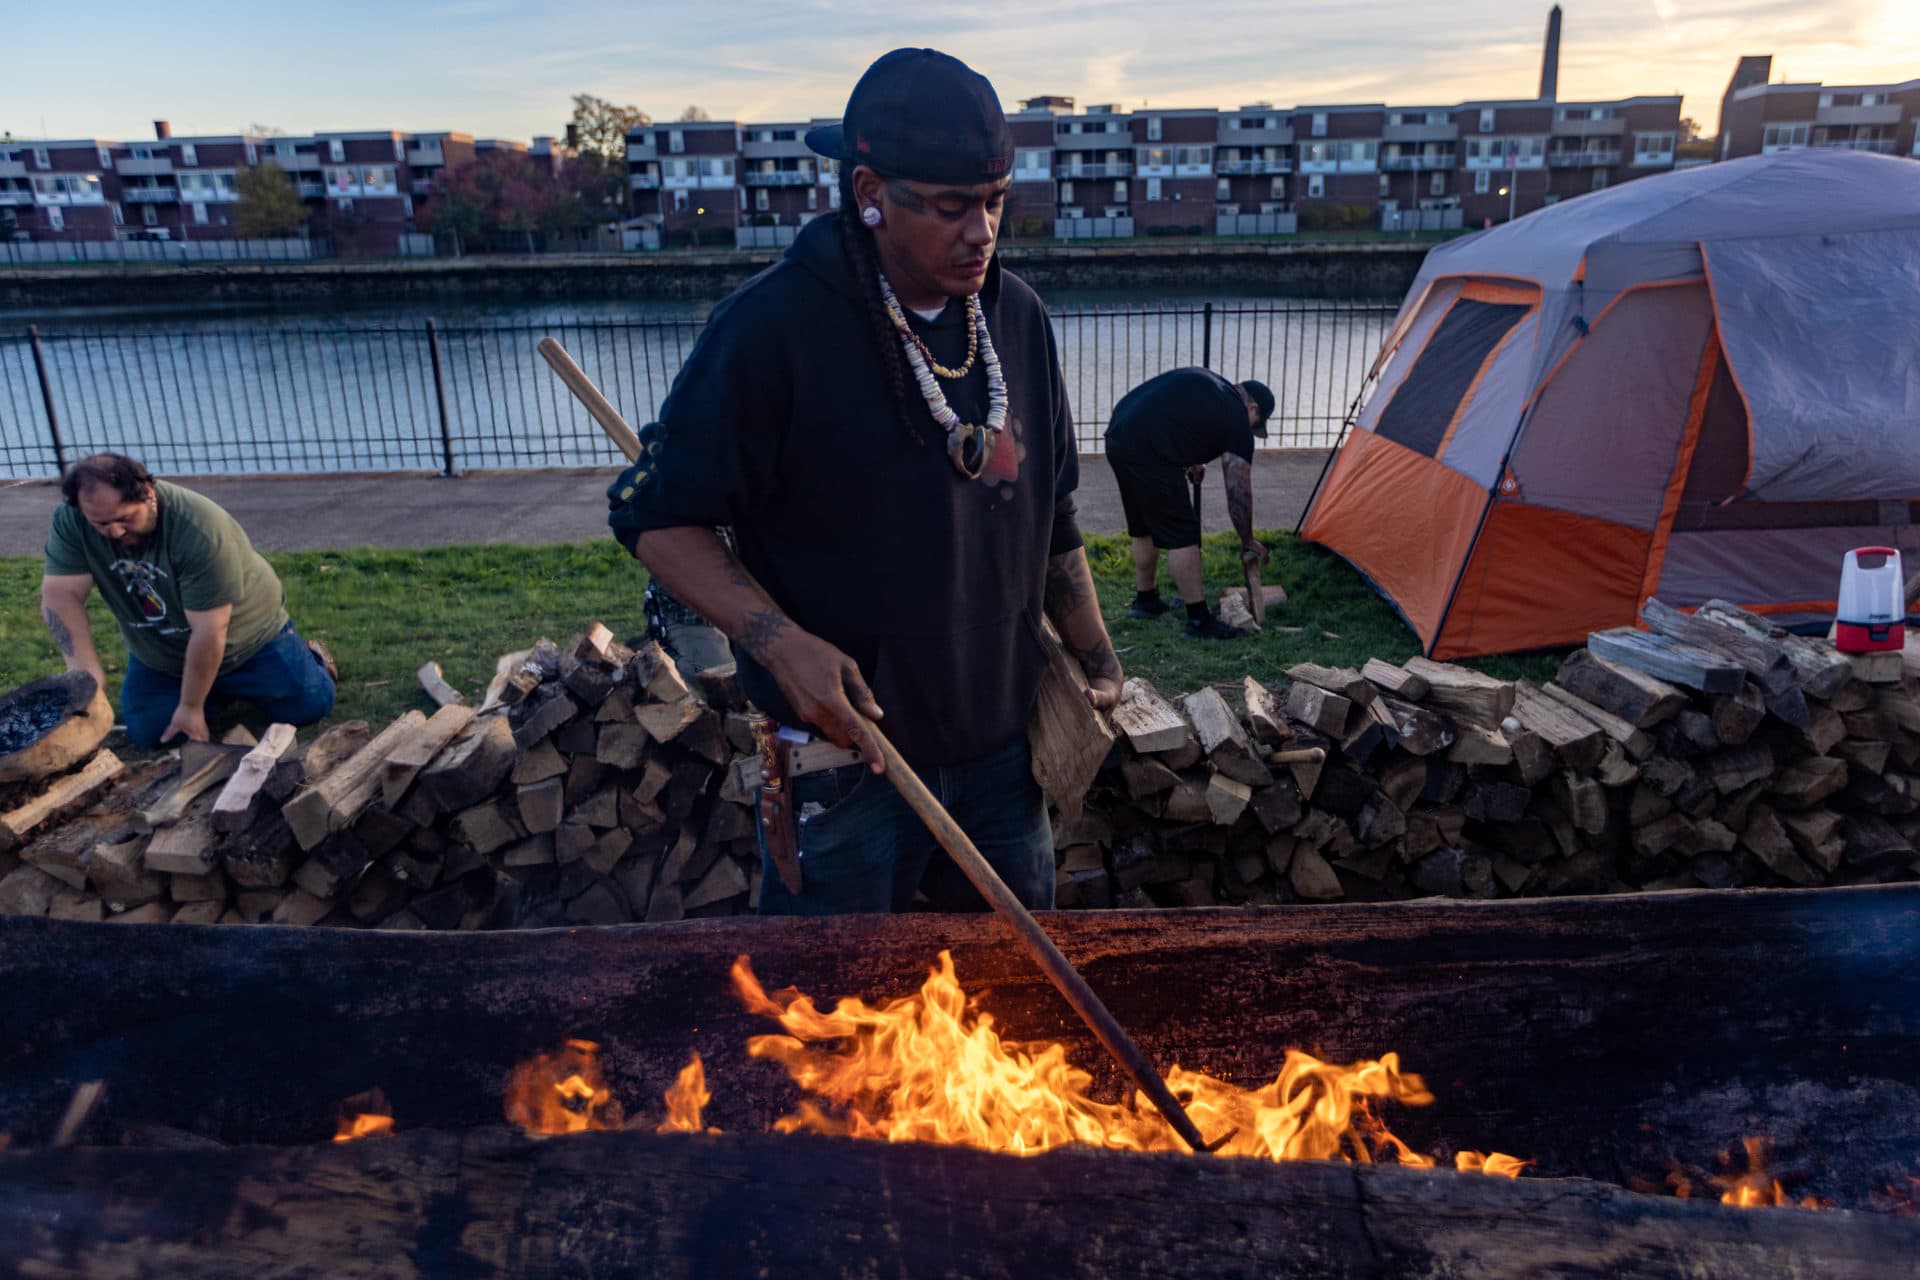 Andre StrongBearHeart, cultural steward of the Nipmuc tribe, tends to the fire while burning a traditional mishoon, or canoe, at the Charlestown Little Mystic Boat Slip. It is the first time in many years a mishoon has been made in the city of Boston. (Jesse Costa/WBUR)